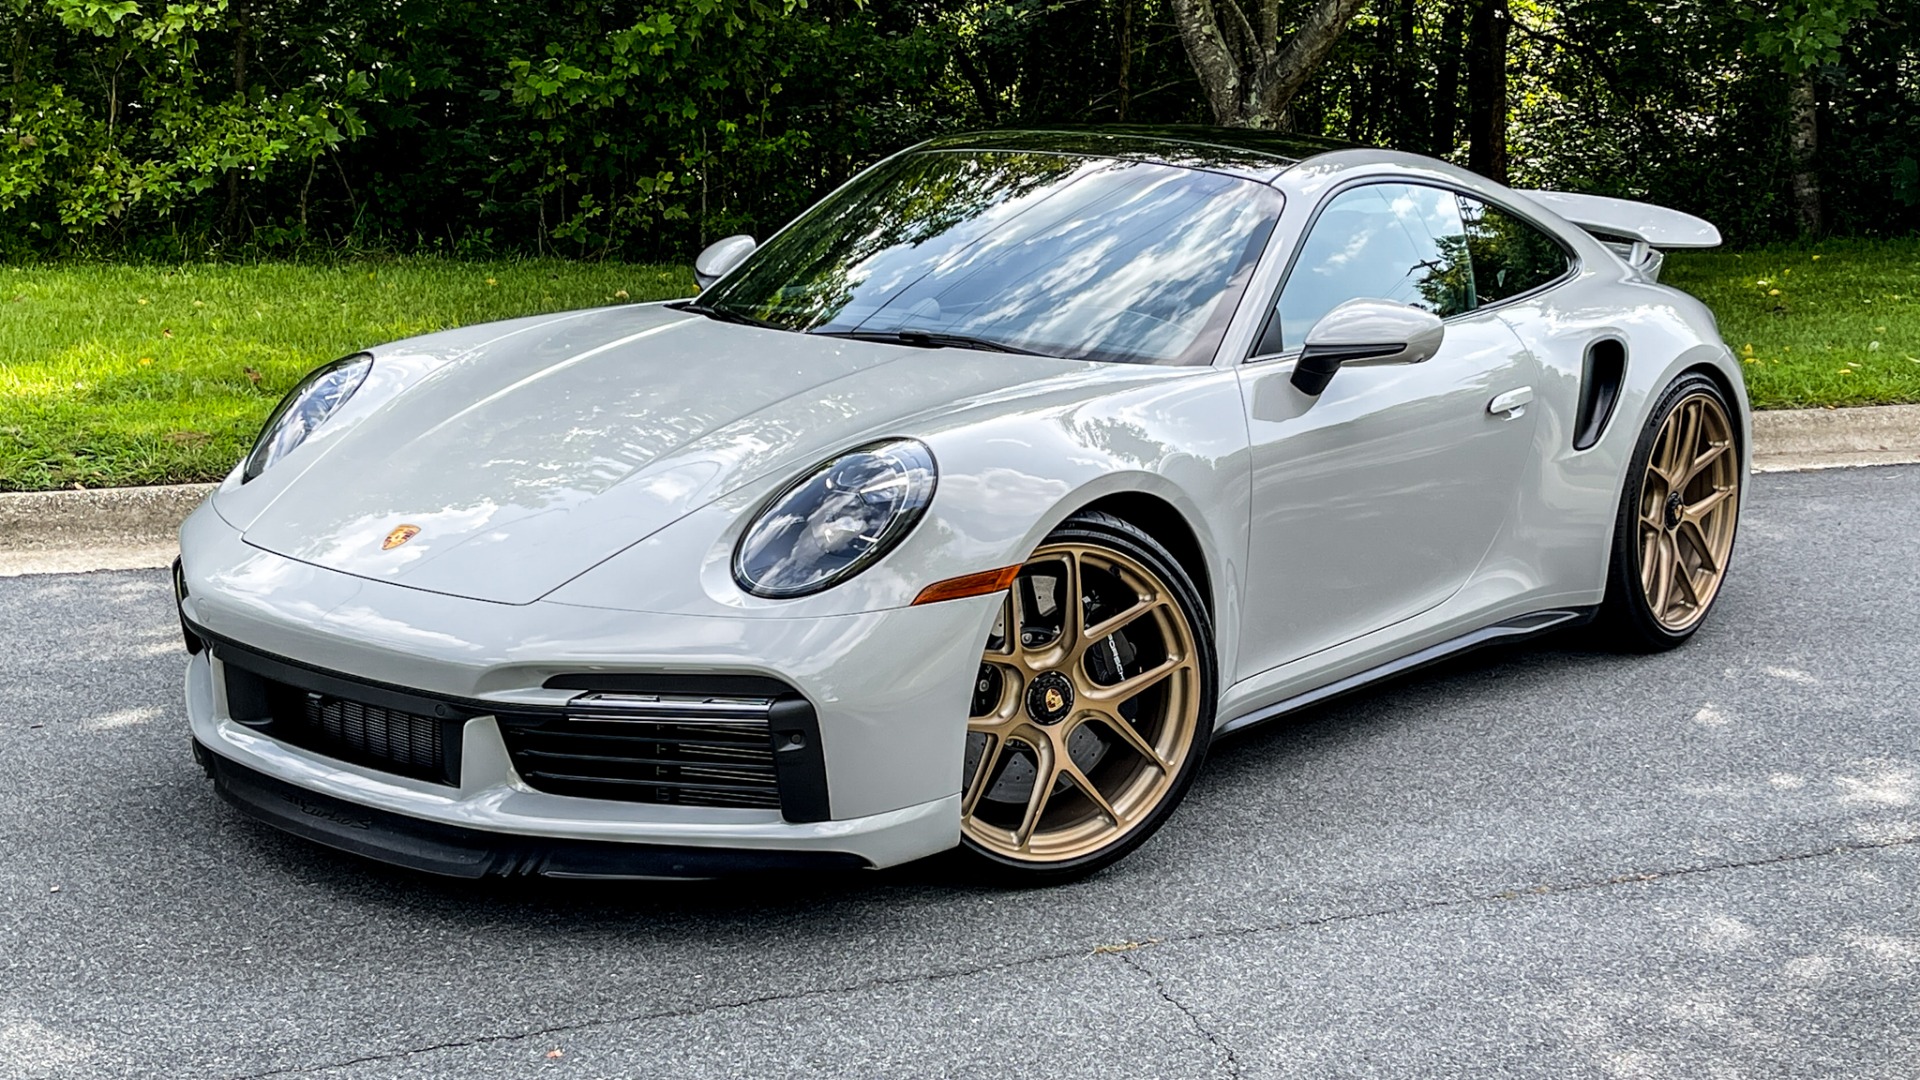 Used 2021 Porsche 911 Turbo S / HRE WHEELS / FRONT LIFT / MATRIX LIGHTS / PASM SUSPENSION for sale $299,000 at Formula Imports in Charlotte NC 28227 2